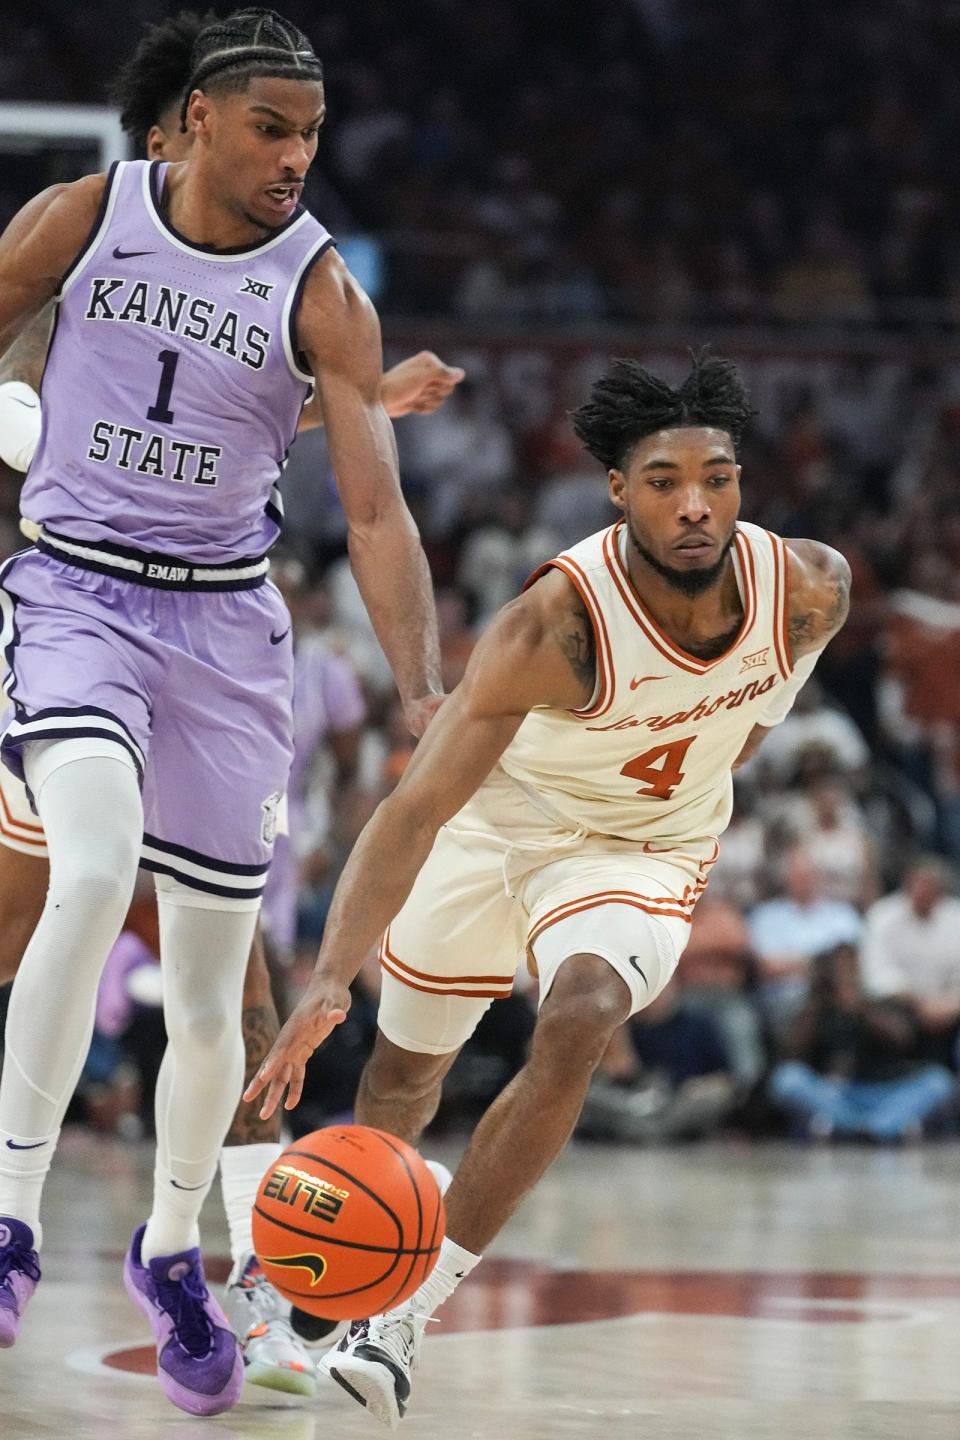 Texas guard Tyrese Hunter was one of the few bright spots for Texas in Saturday's loss at Kansas after scoring 12 points and dishing out four assists. The Longhorns travel to Lubbock for perhaps a final meeting with Texas Tech on Tuesday.